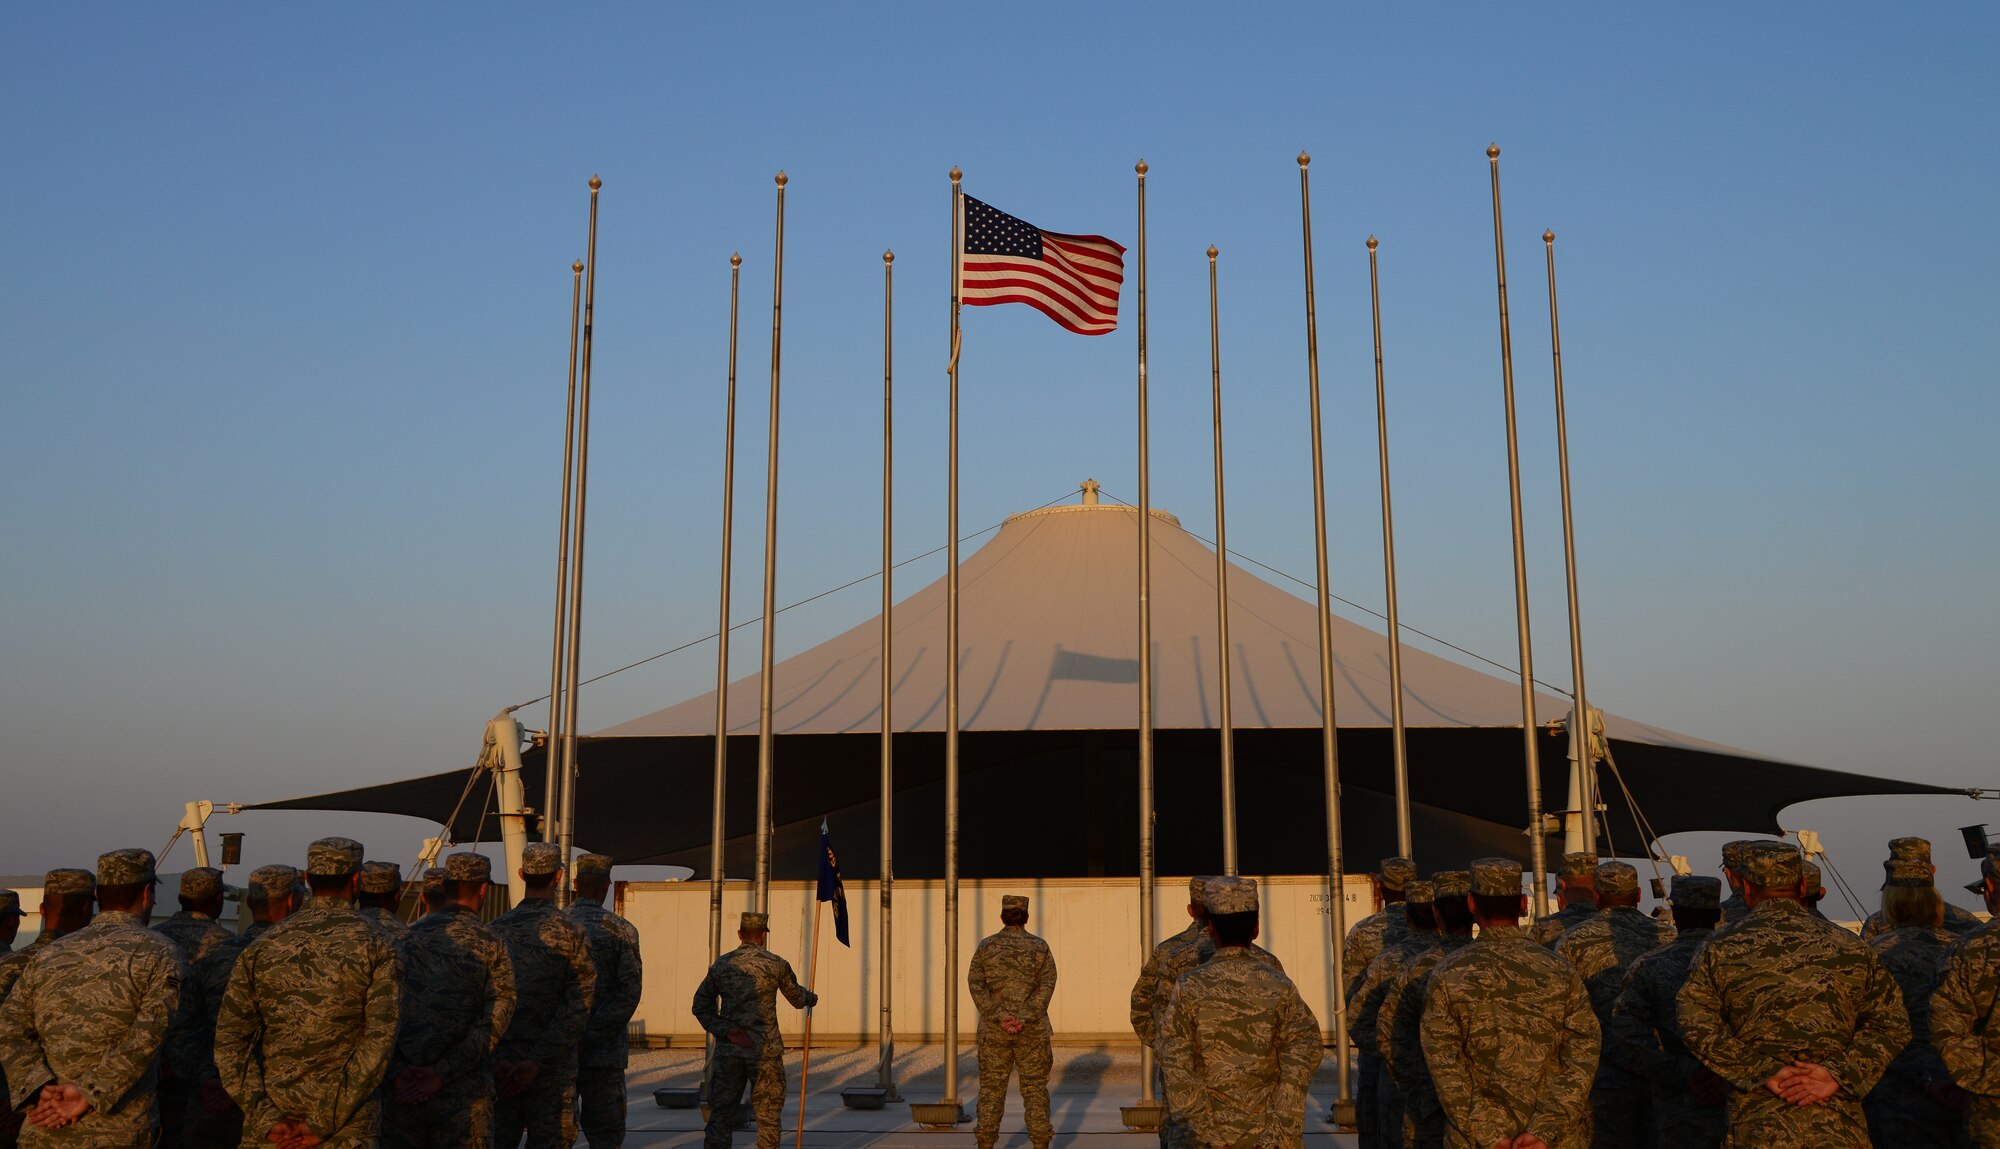 U.S. Air Force Airmen from the 379th Expeditionary Medical Group stand at parade rest during a retreat ceremony in honor of U.S. Servicemembers on Veteran’s Day, Nov. 11, 2014, at Al Udeid Air Base, Qatar. Joint remembrance ceremonies were held throughout the day in honor of Veteran’s and Remembrance Day. (U.S. Air Force photo by Senior Airman Kia Atkins)